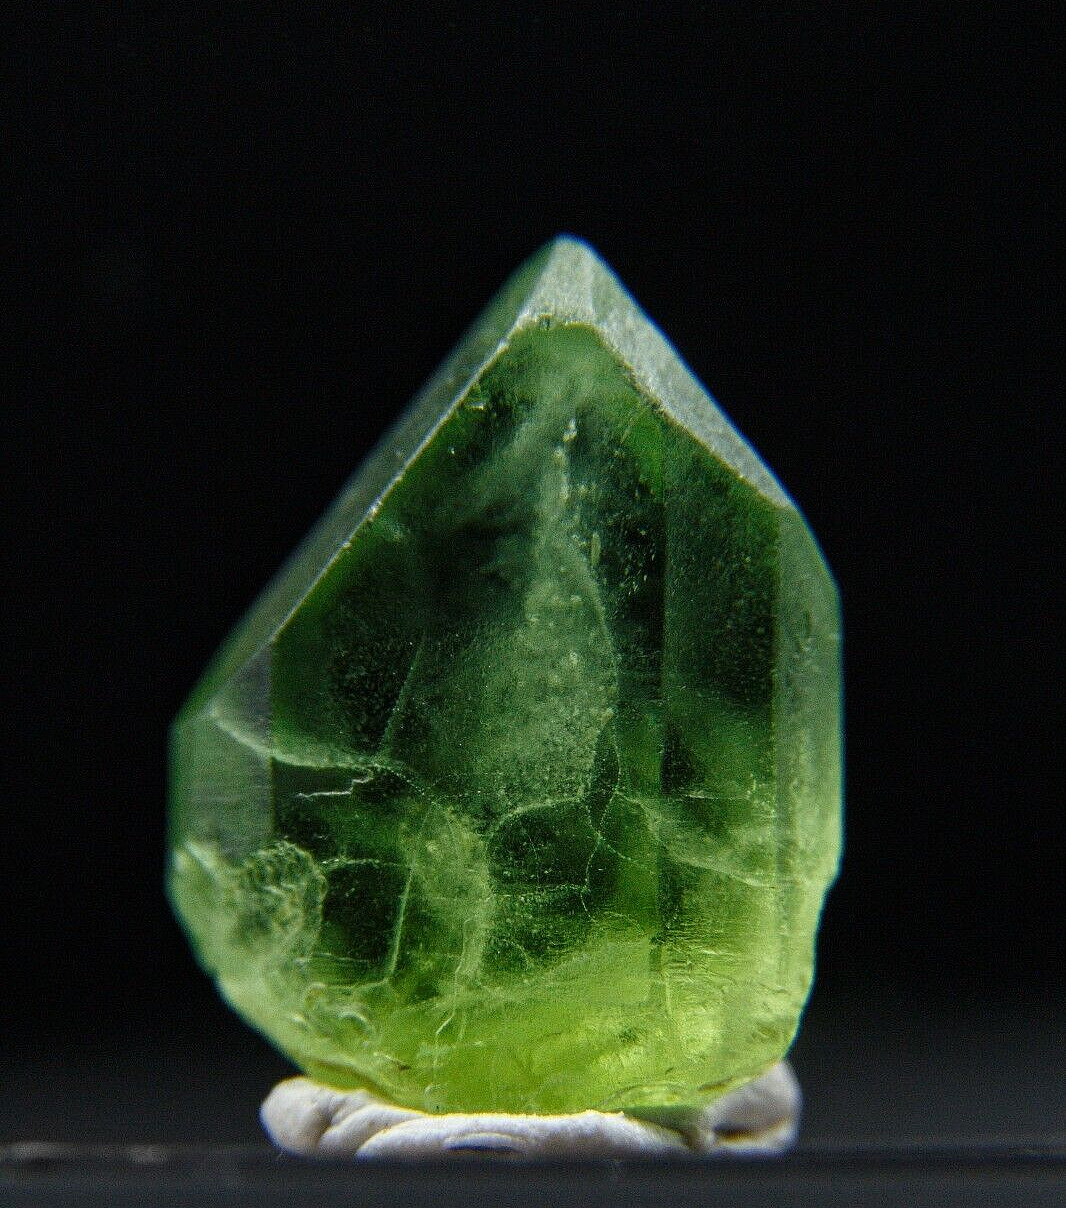 Peridot Crystal 24 carats with Complete Termination